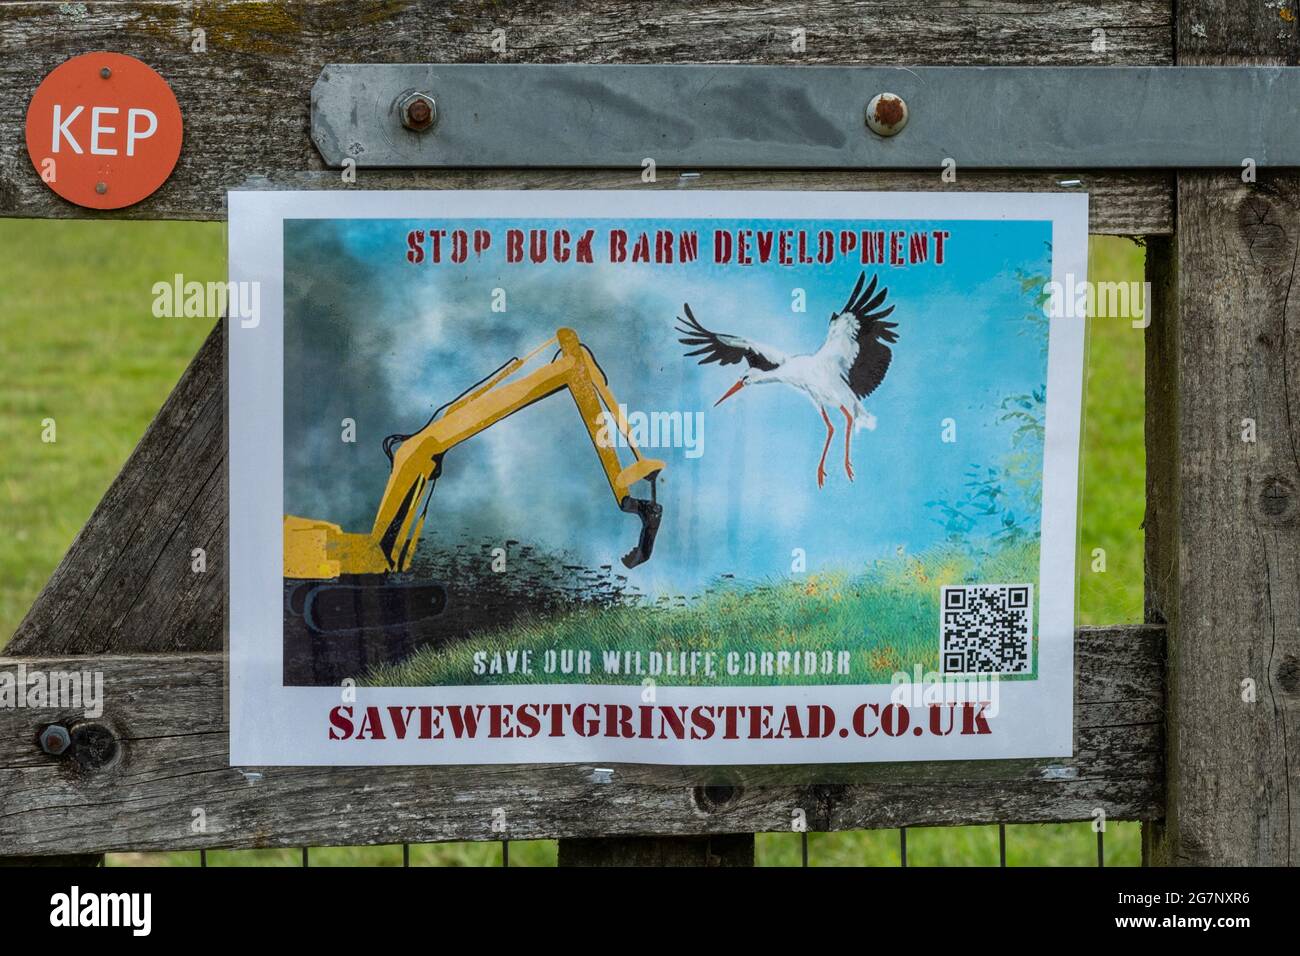 Stop Buck Barn Development protest poster at the Knepp Estate Wildland, UK. The proposed house building would cut off a wildlife corridor. Stock Photo